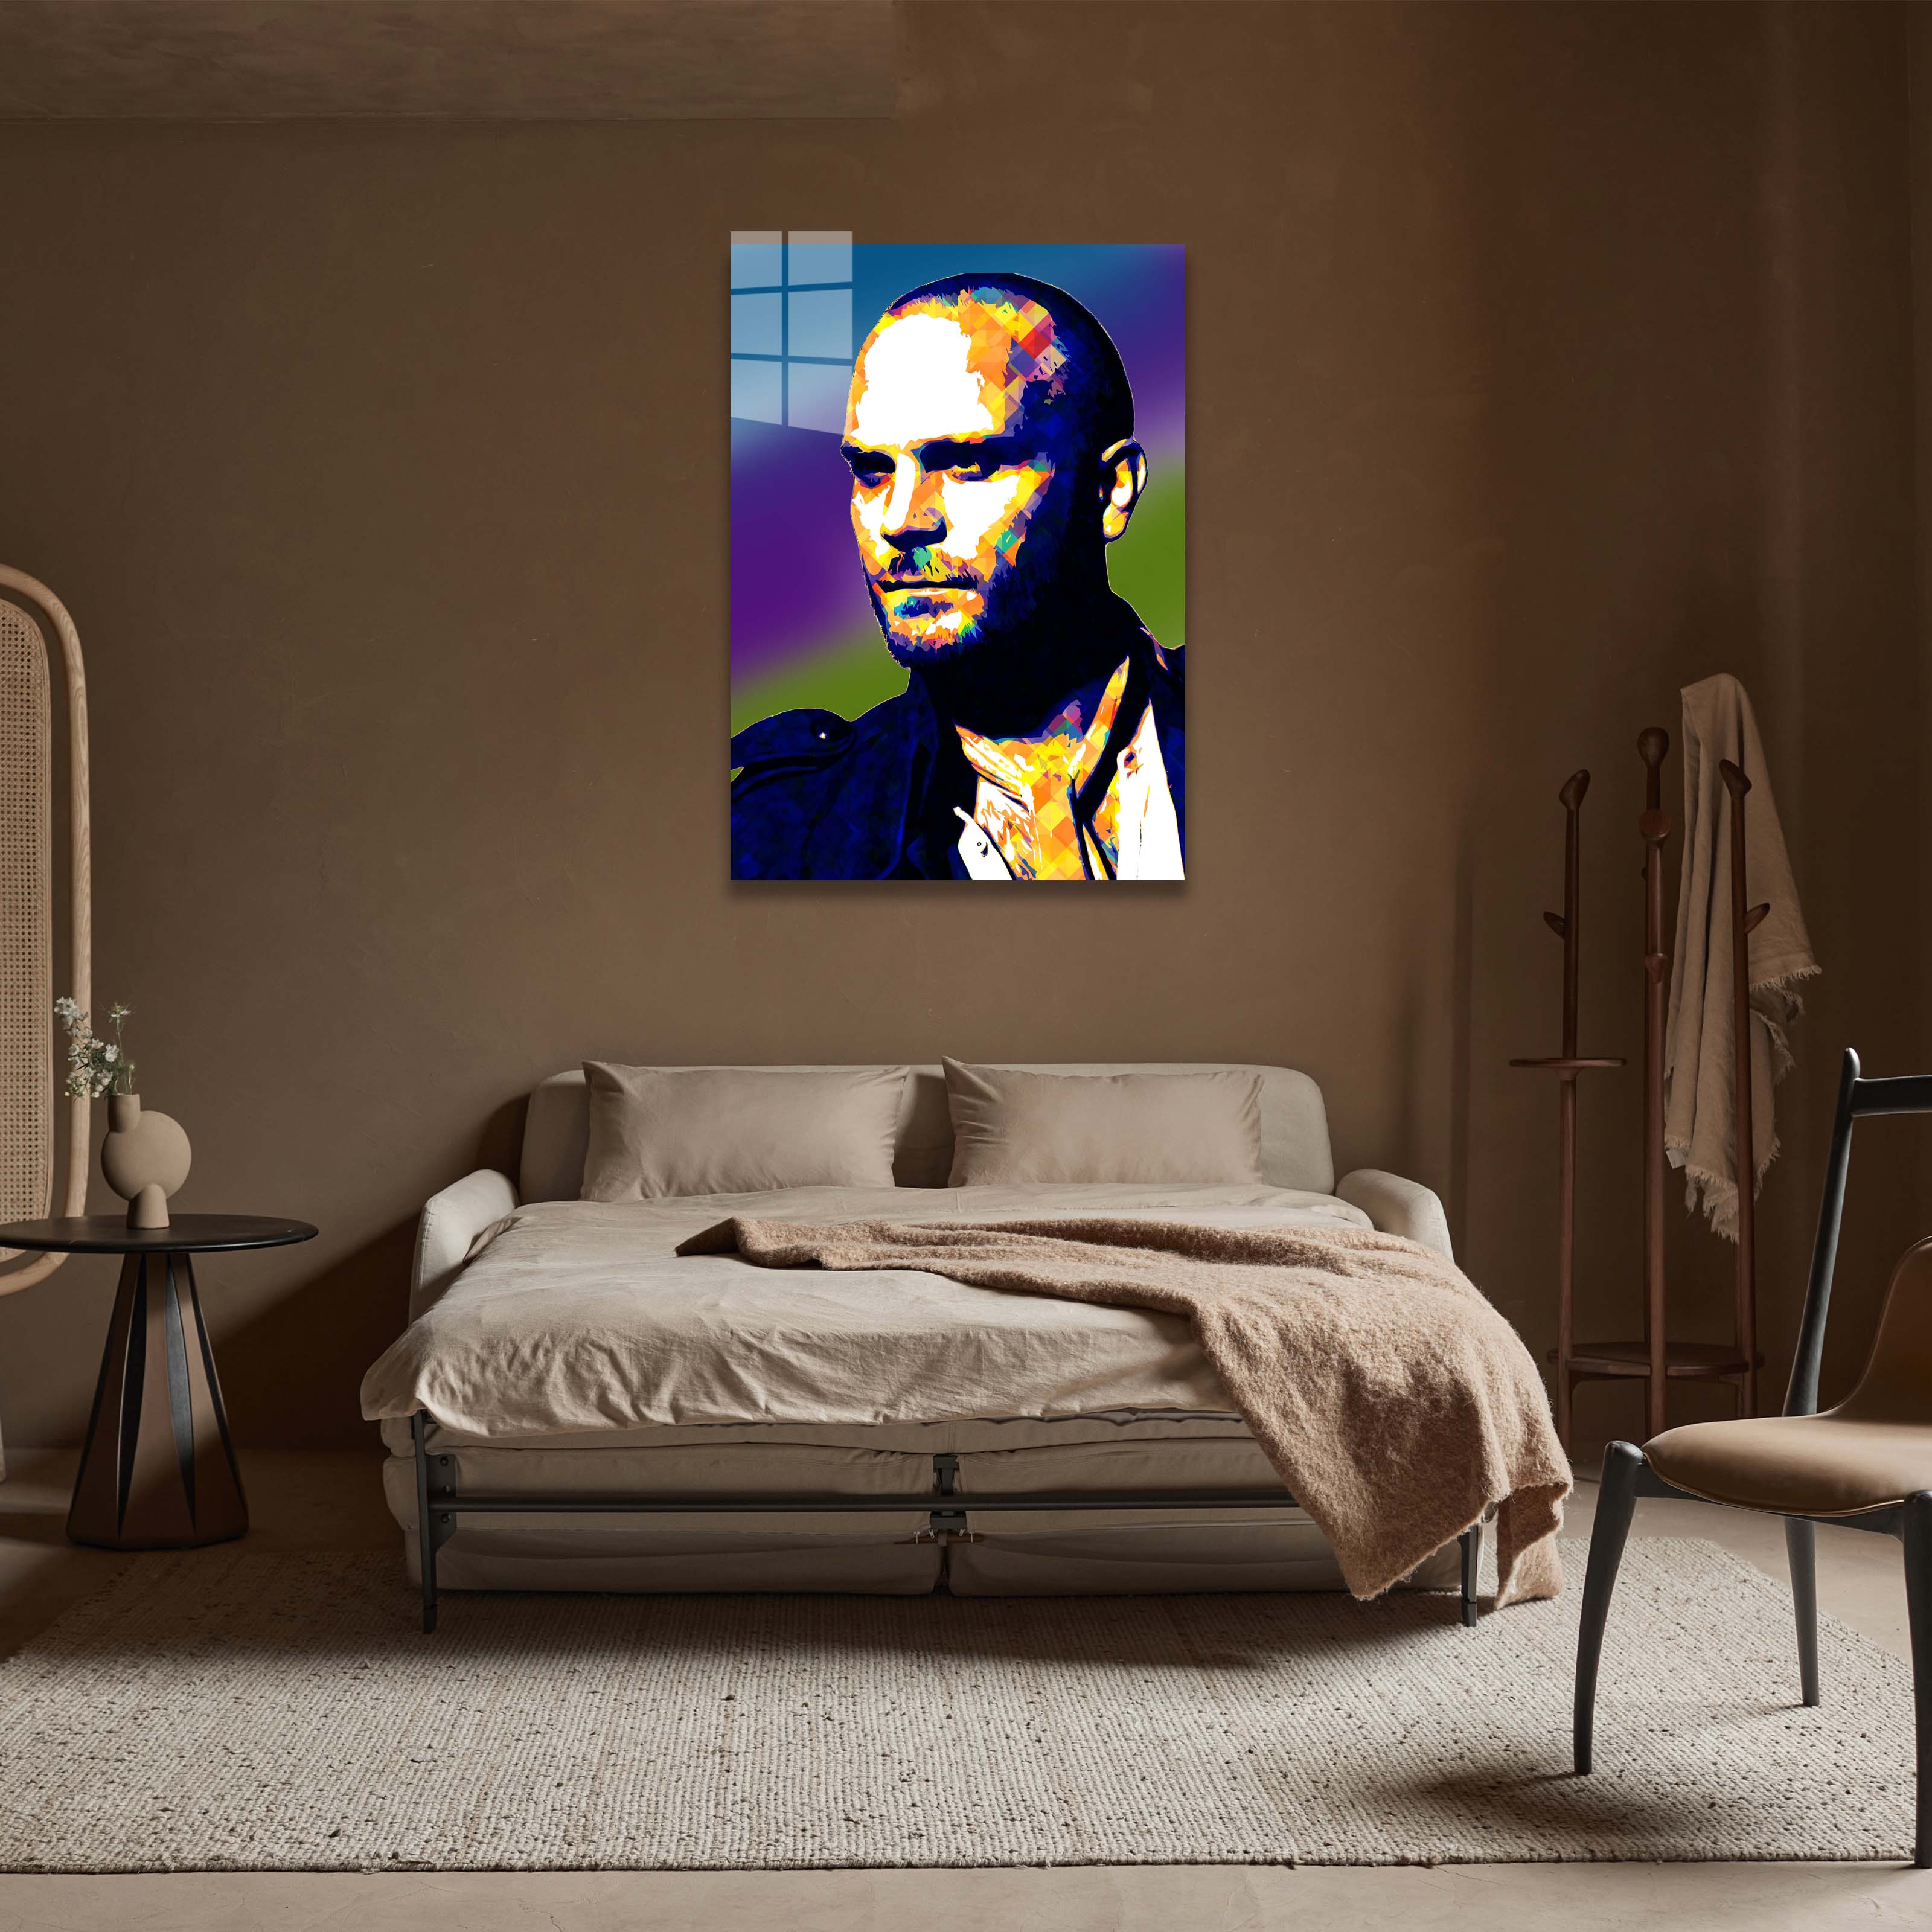 will champion - coldplay-designed by @rizal.az